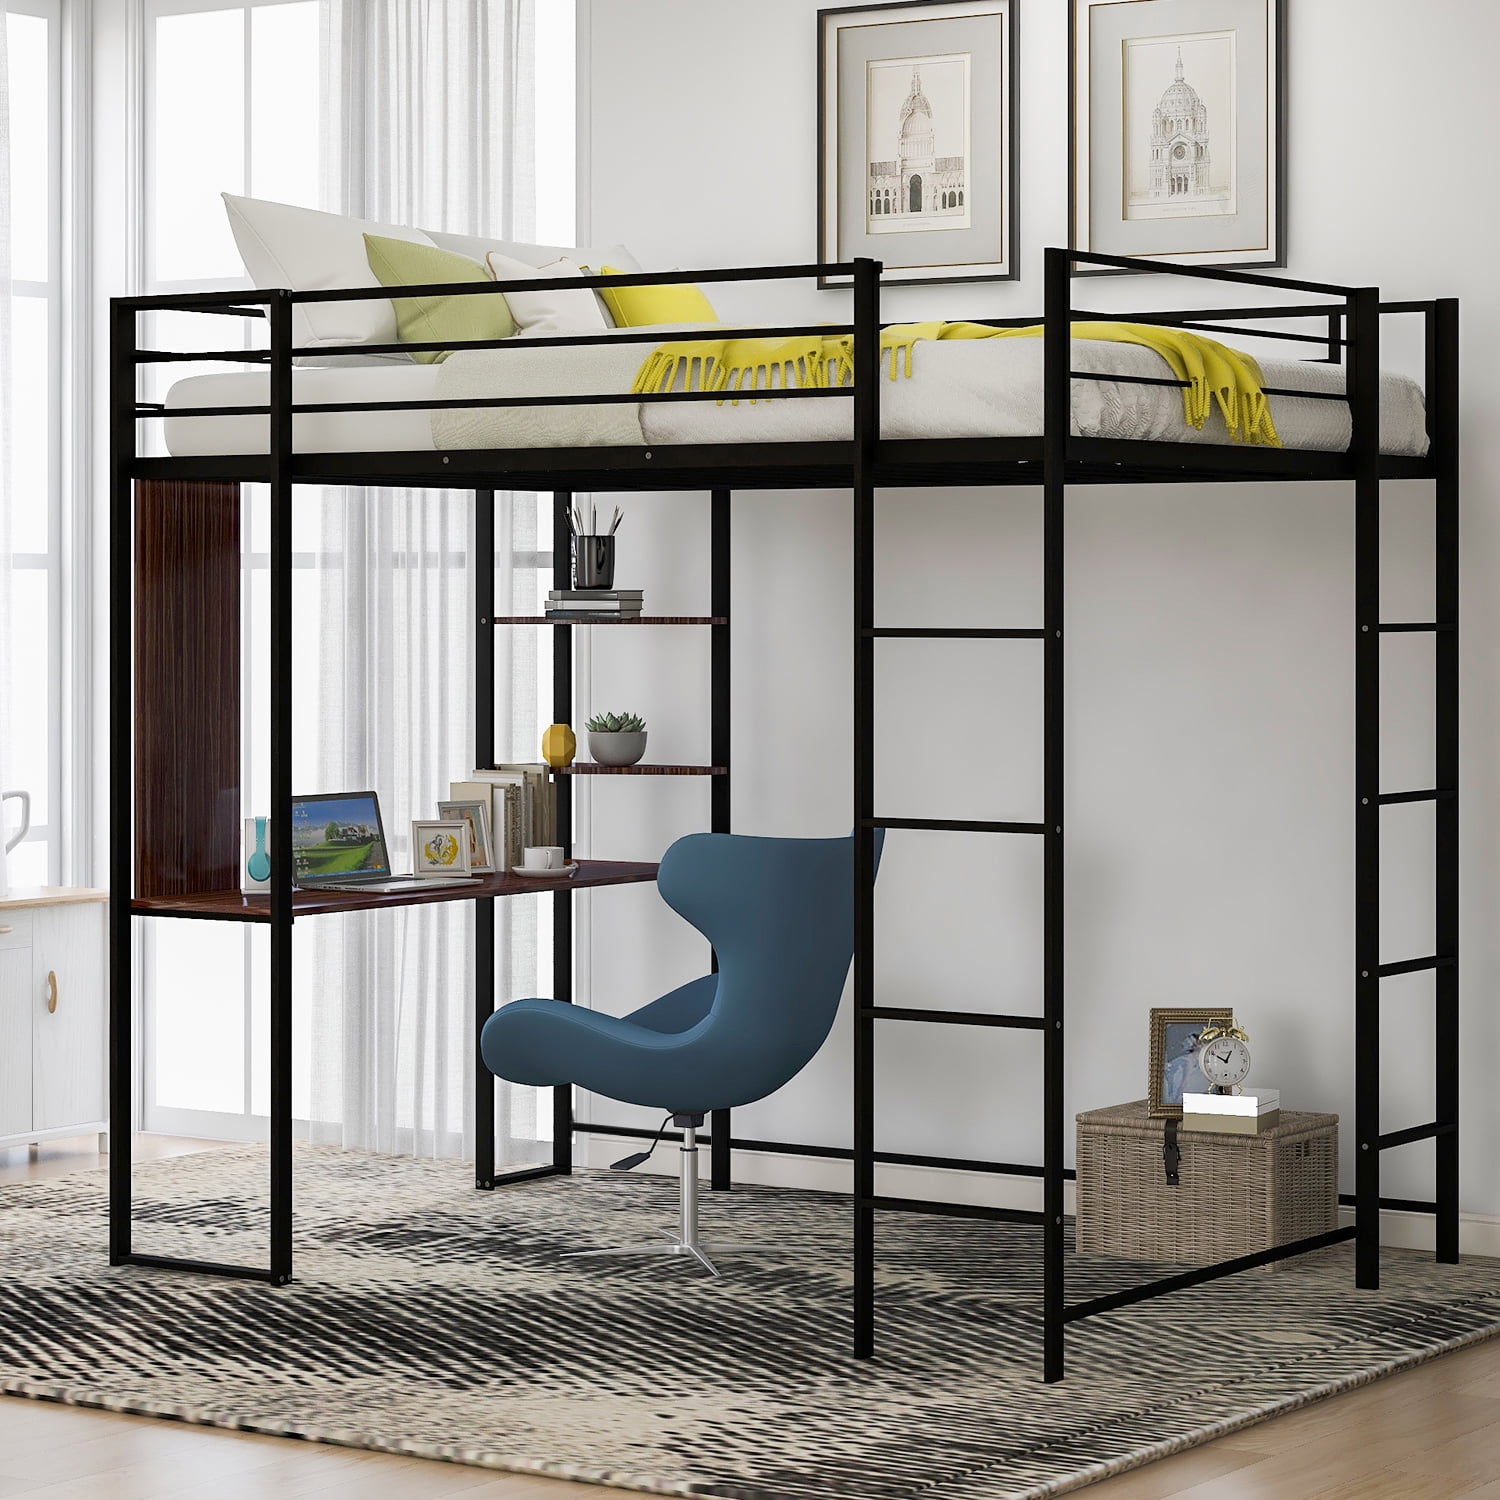 Sentern Metal Full Size Loft Bed With, Bunk Bed With Space For Desk Underneath